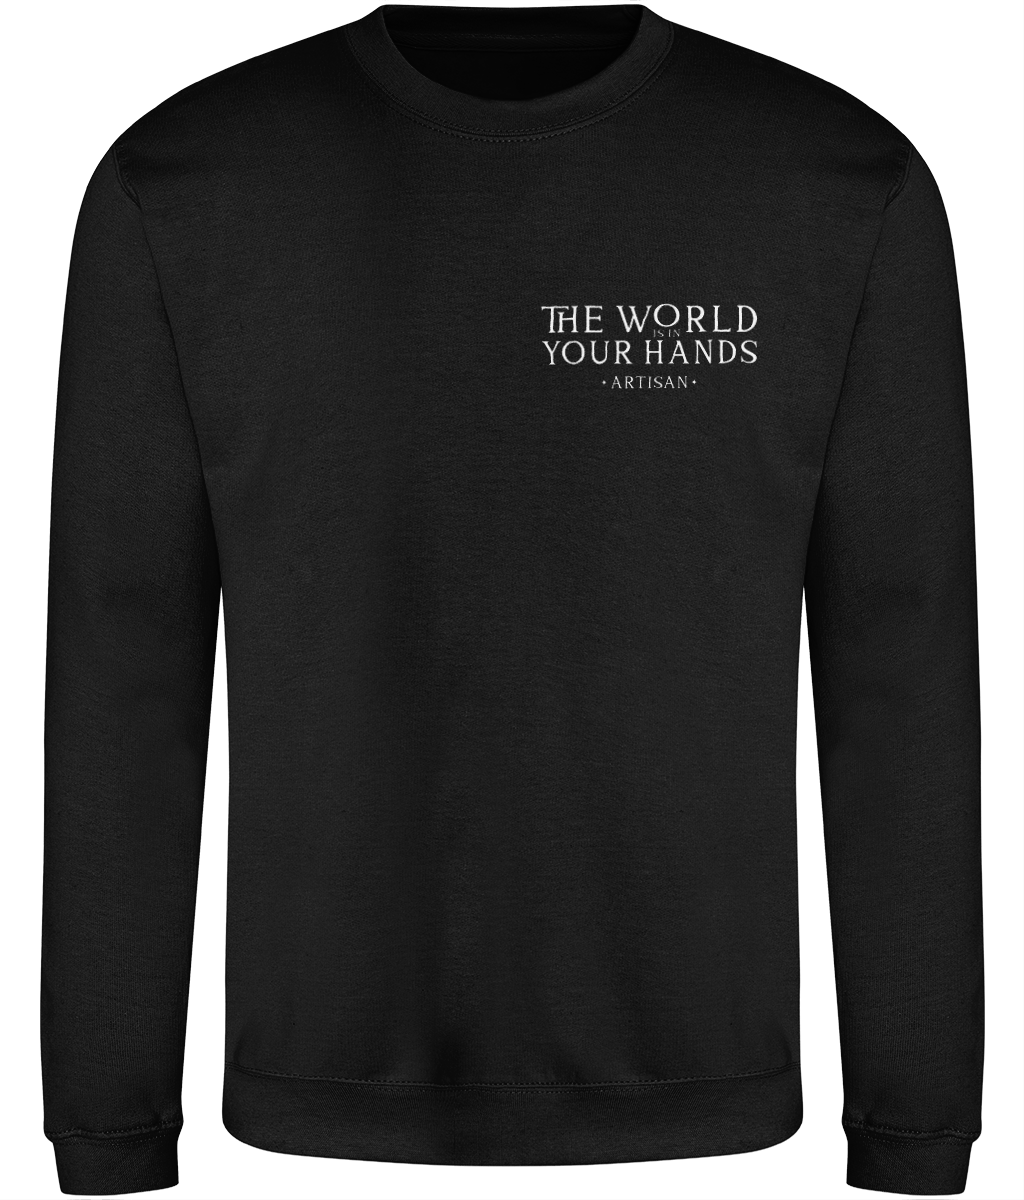 Sweatshirt, Be Proud of the role you play in Shaping the World